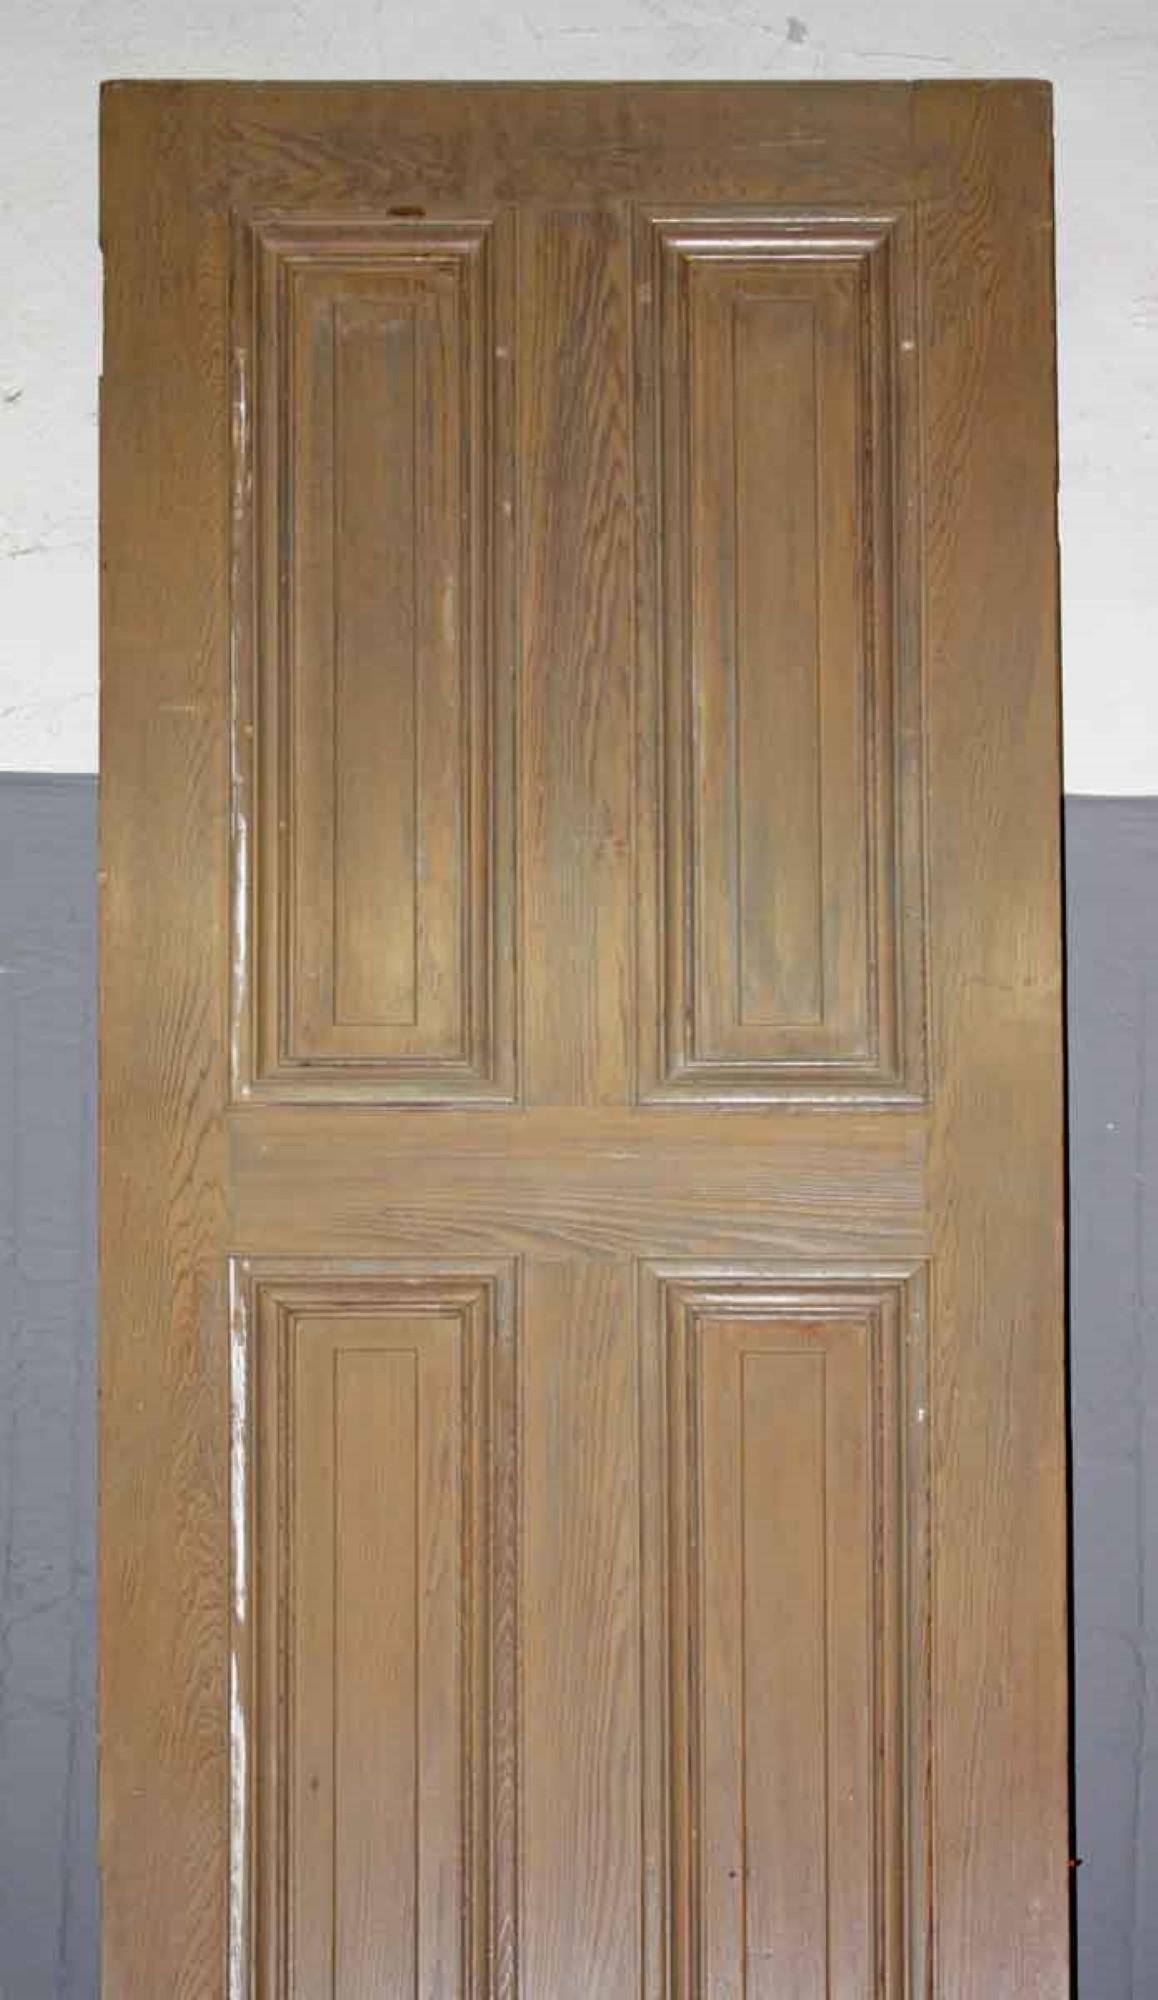 This exceptionally tall 1920s door features 6 panels. Various dings from being a 90+ year old door. This can be seen at our 400 Gilligan St location in Scranton. PA. Measures: 122.75 inches high x 27.5 inches wide.